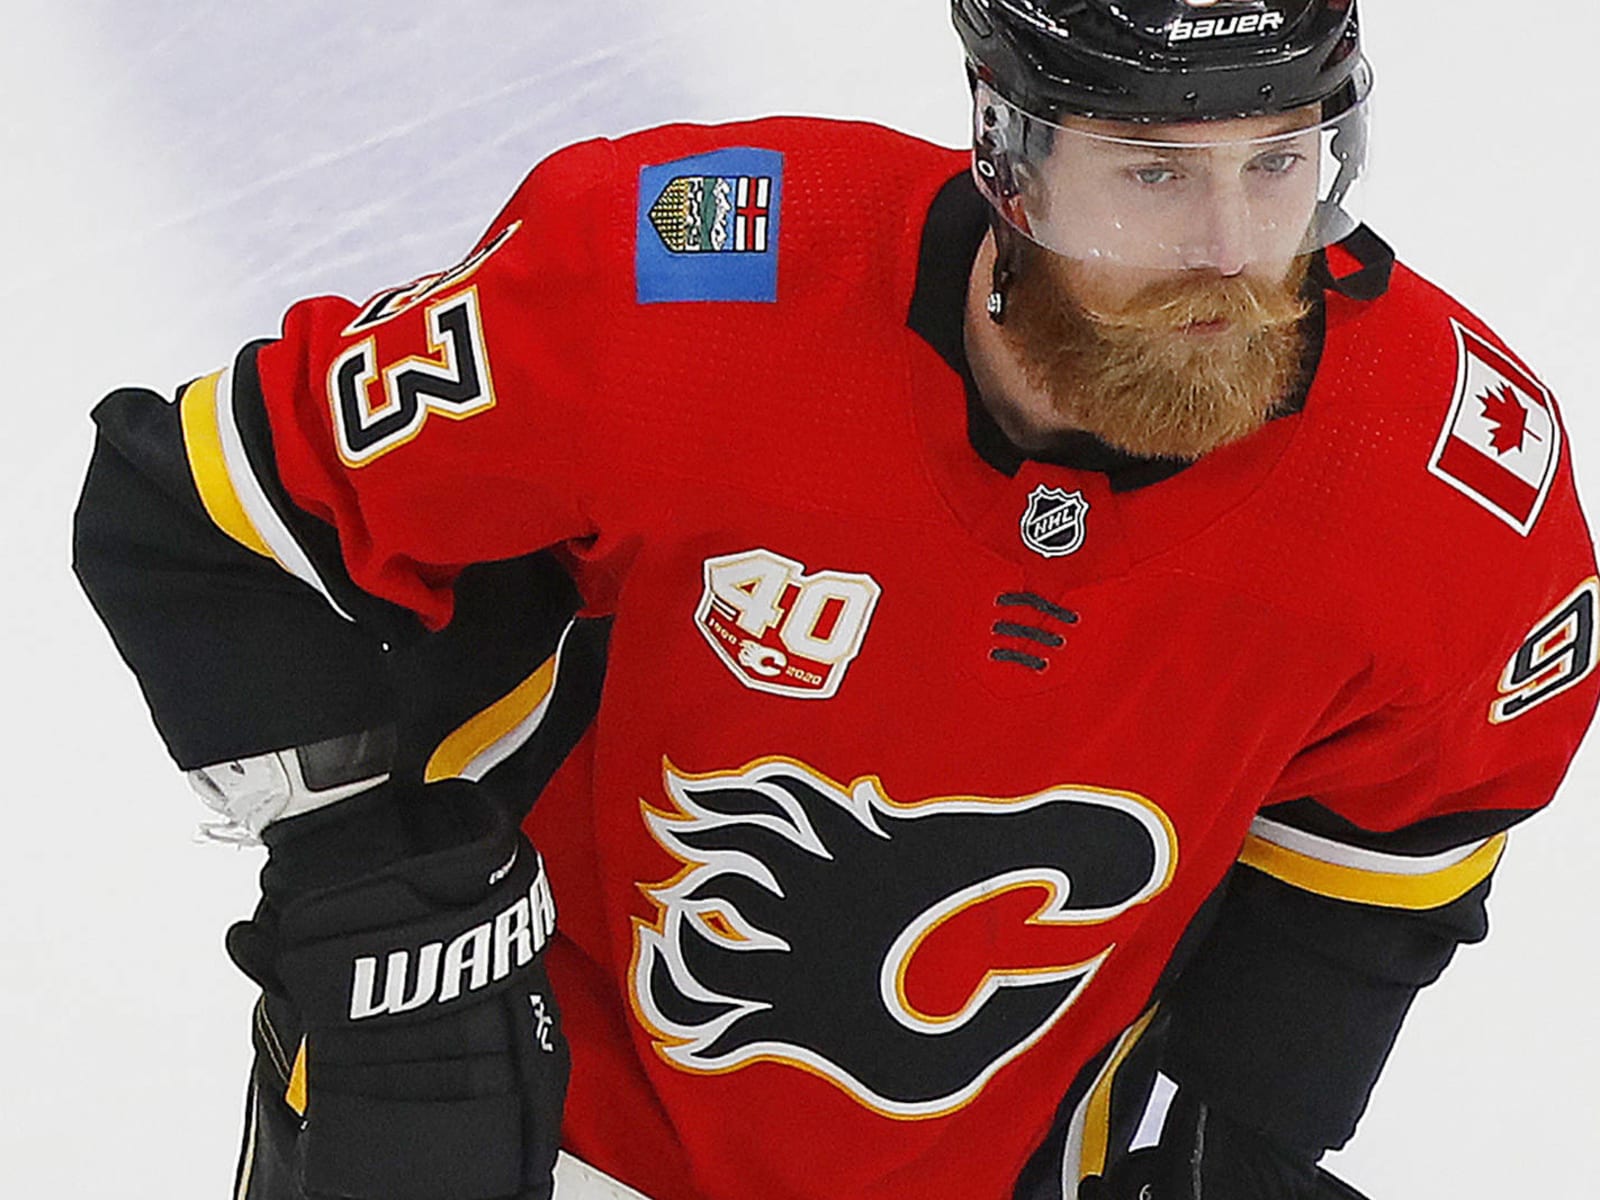 Change of plans: Bennett to join Calgary Flames - NBC Sports